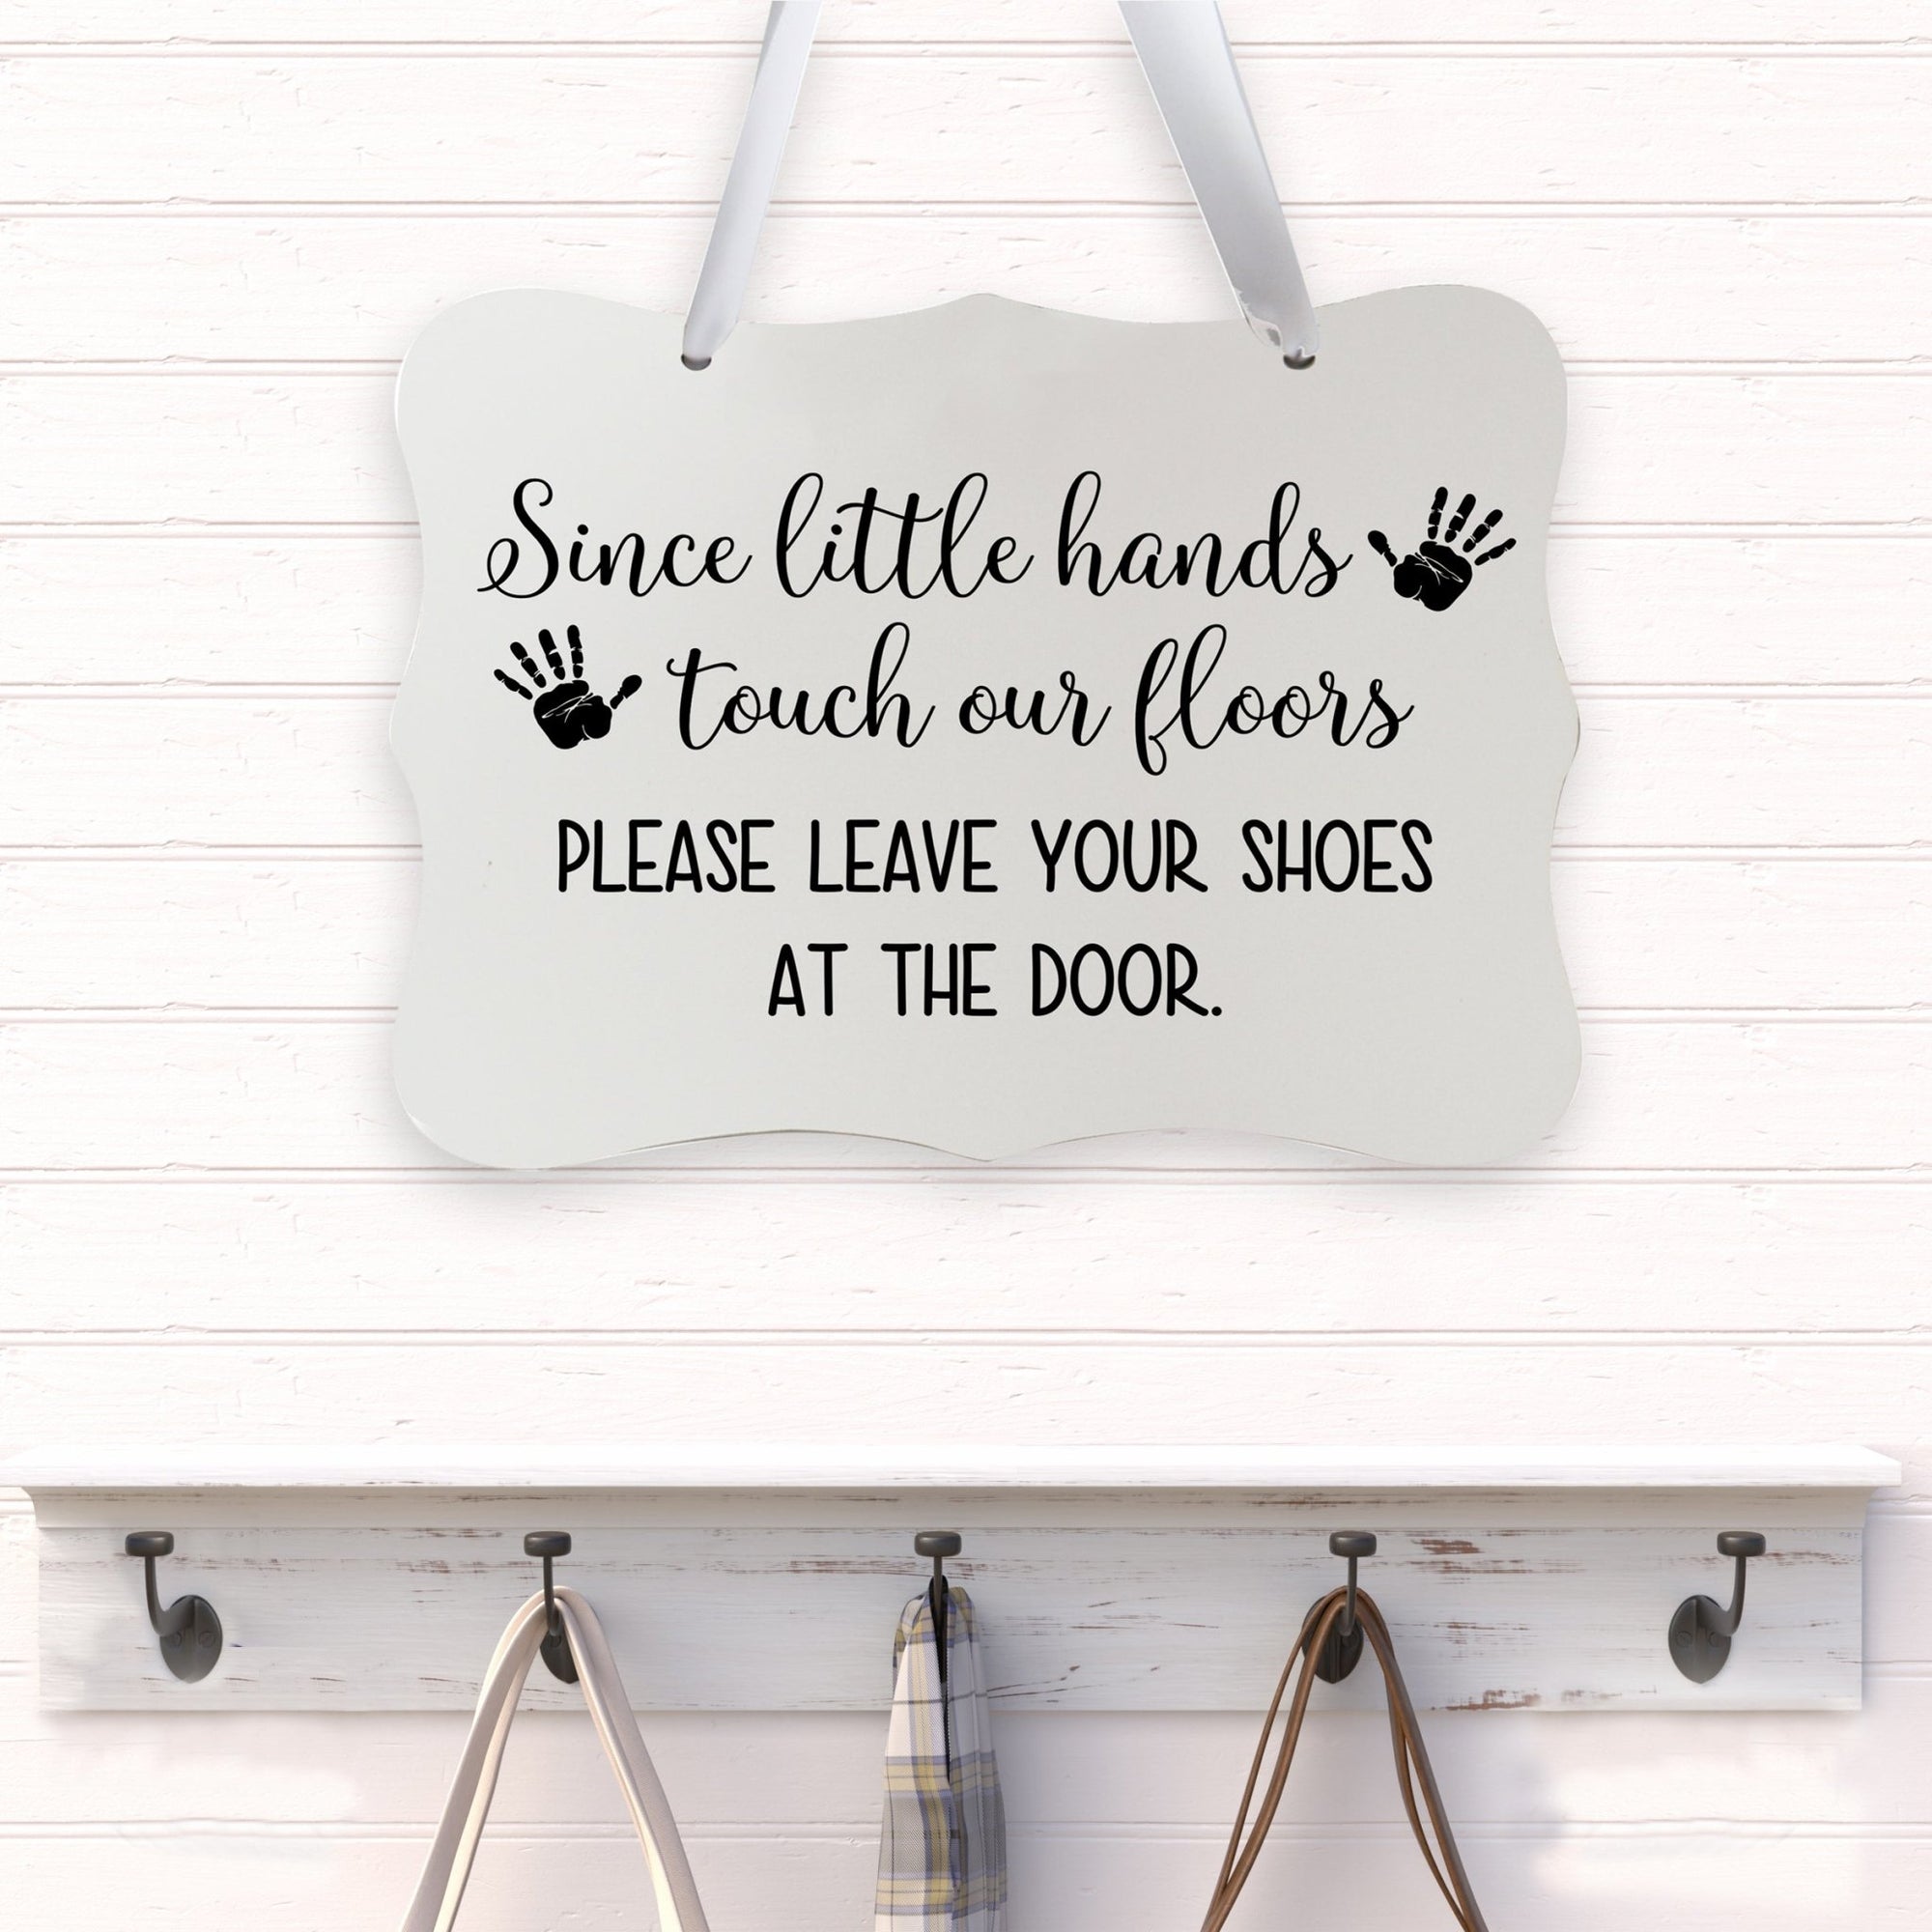 Inspirational Hanging Ribbon Wall Sign for Kids - Please Leave Your Shoes - LifeSong Milestones